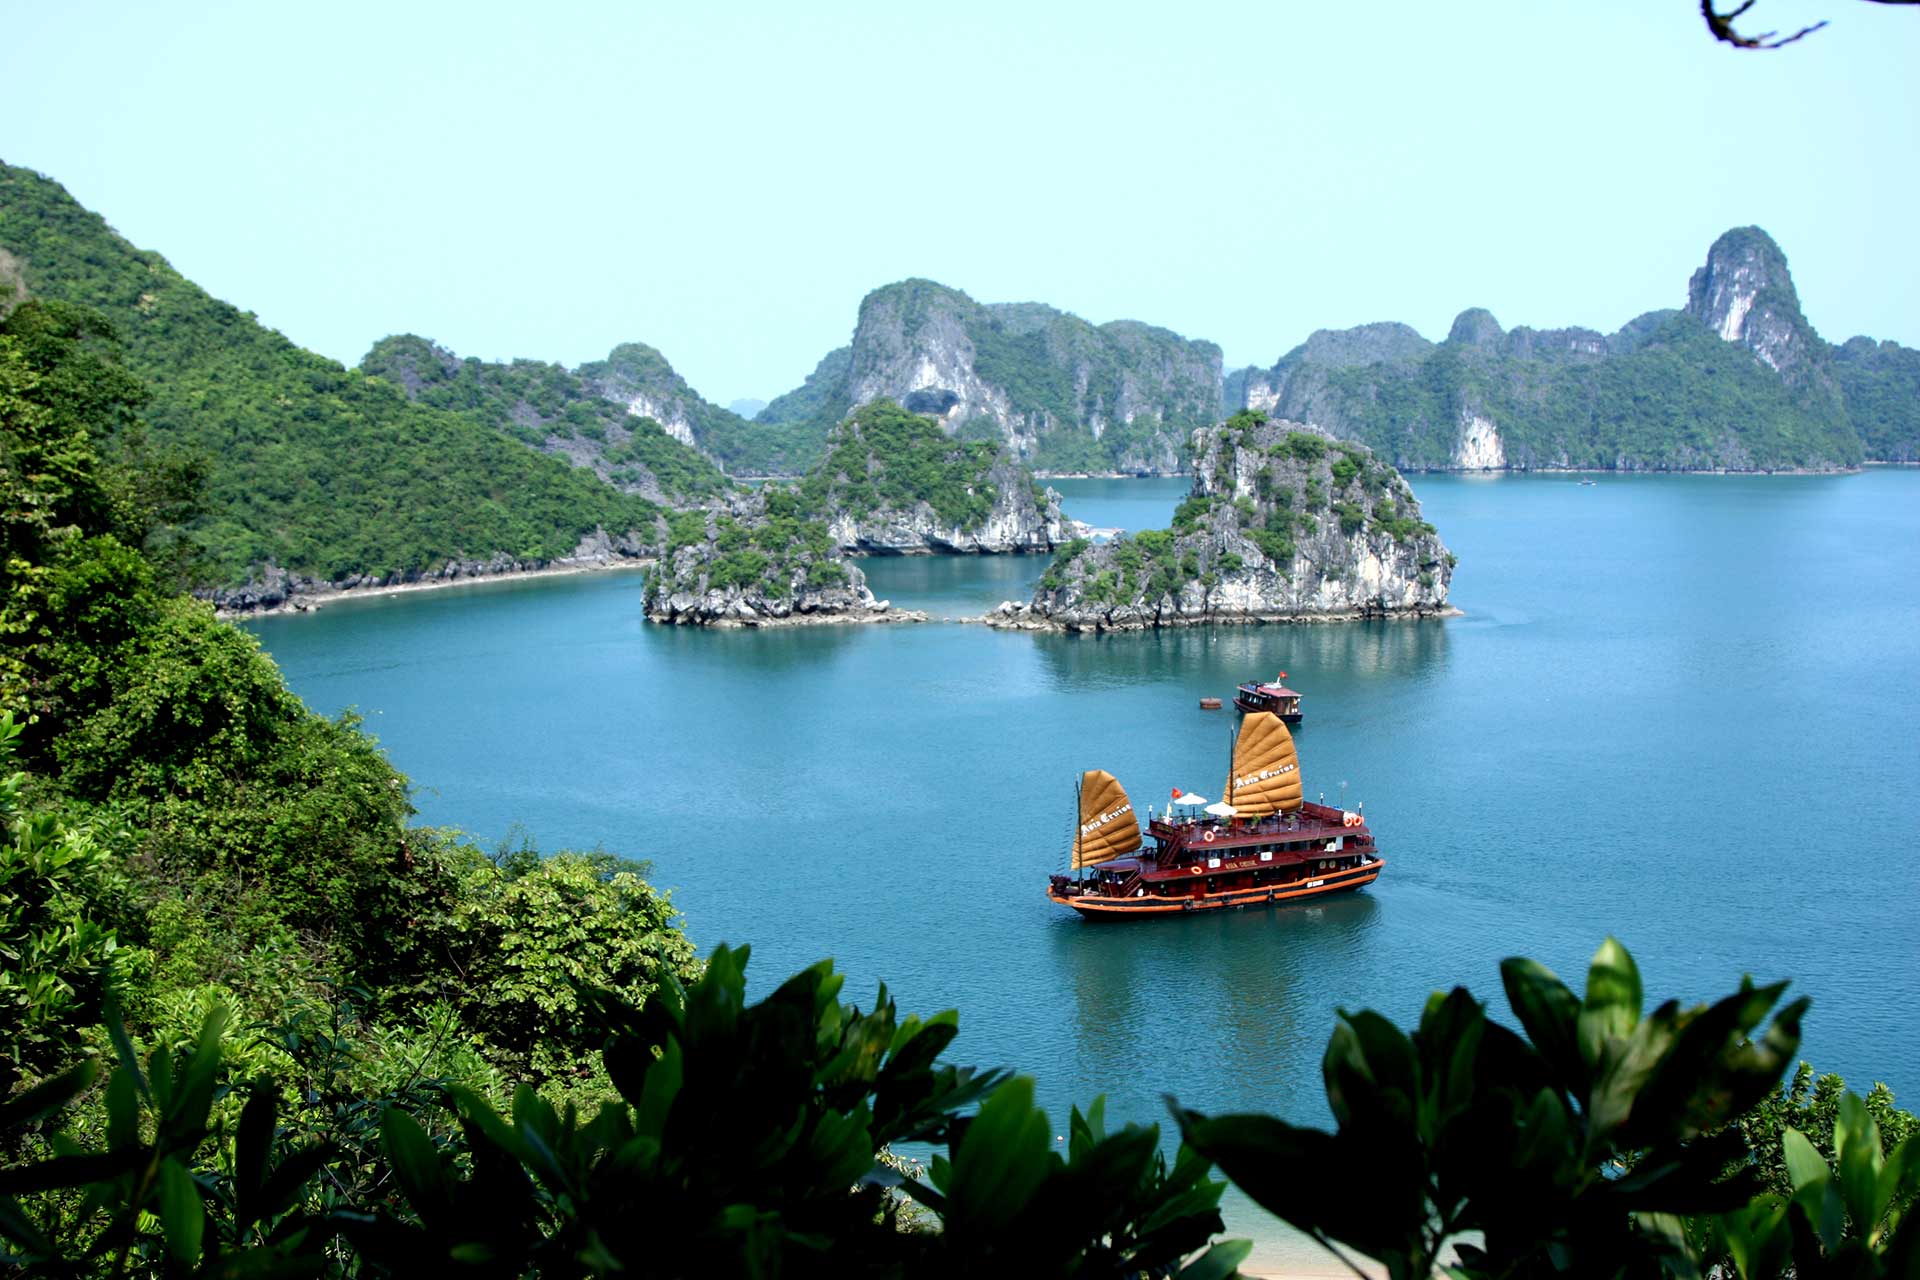 A cruise ship sailing on the emerald water of Halong Bay